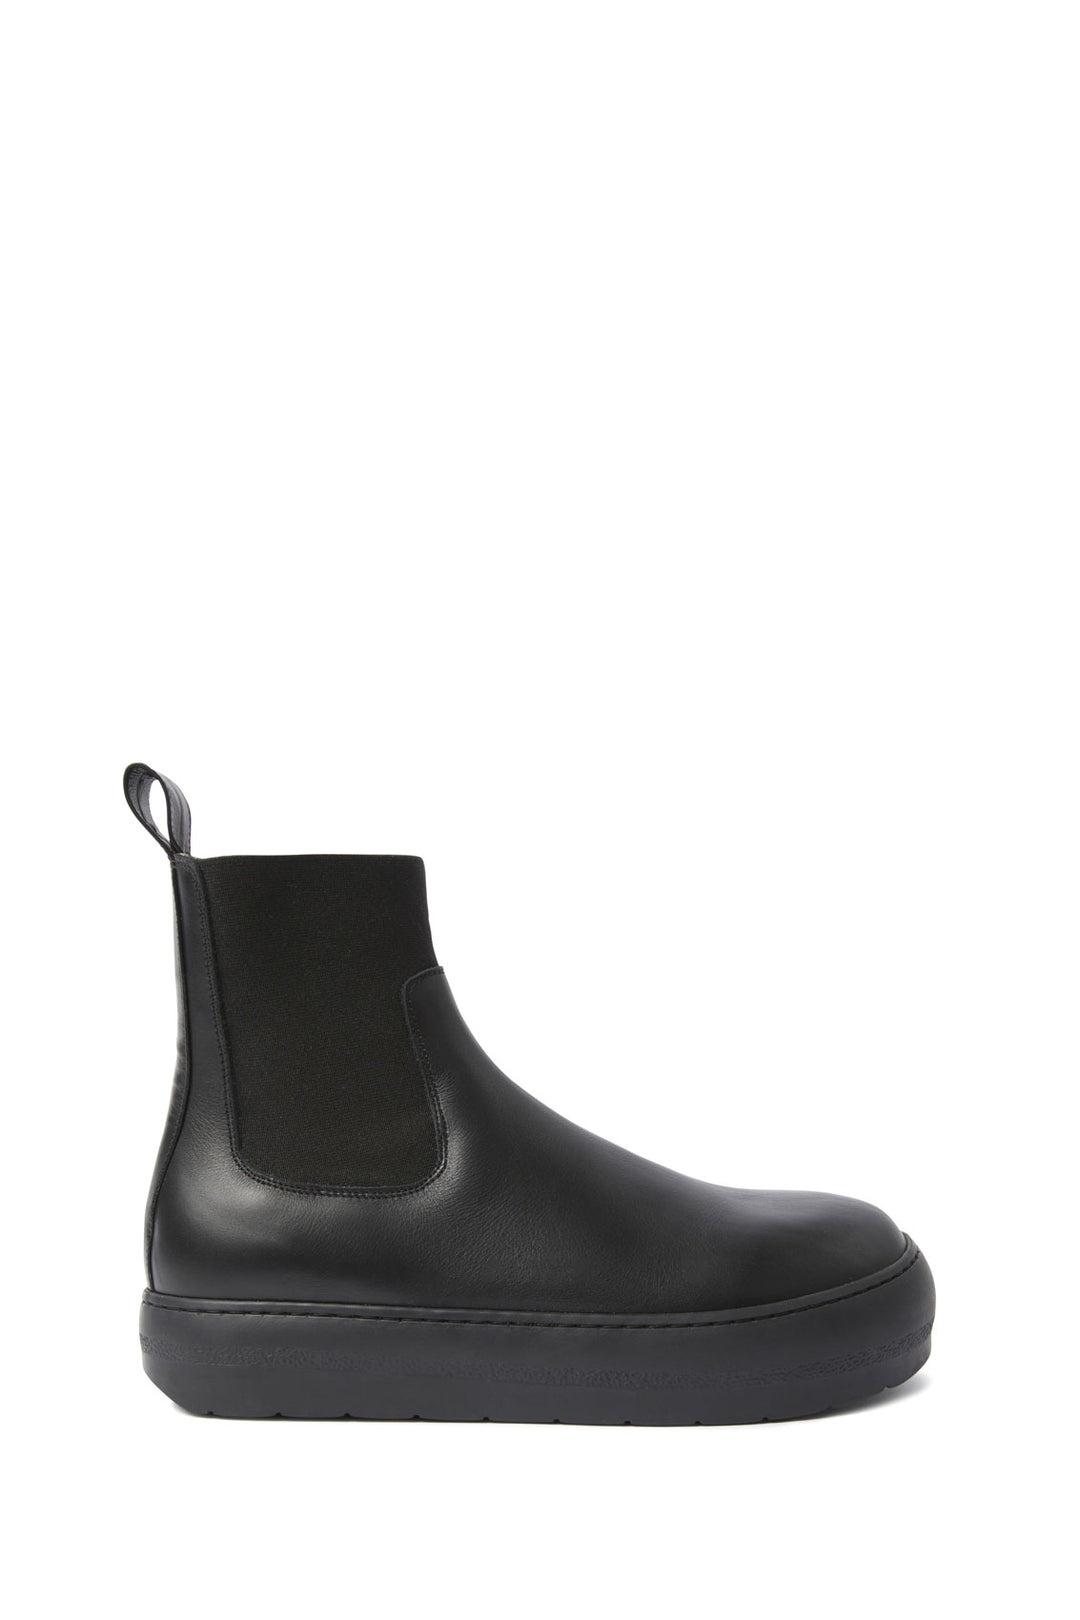 DREAMY ANKLE BOOTS / leather / total black - 1